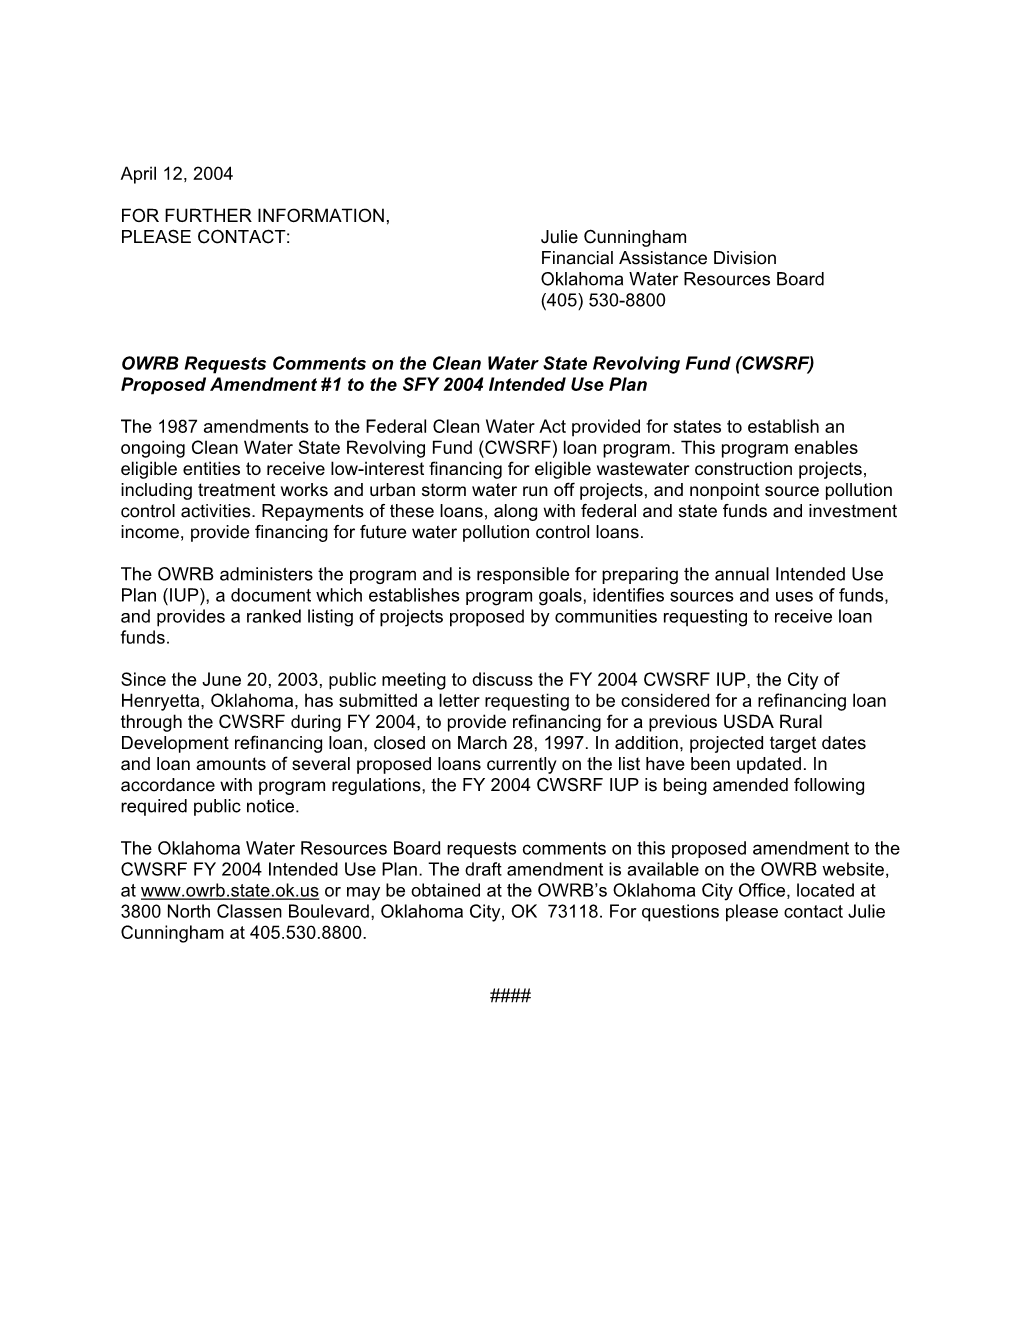 OWRB Requests Comments on the Clean Water State Revolving Fund (CWSRF) Proposed Amendment #1 to the SFY 2004 Intended Use Plan